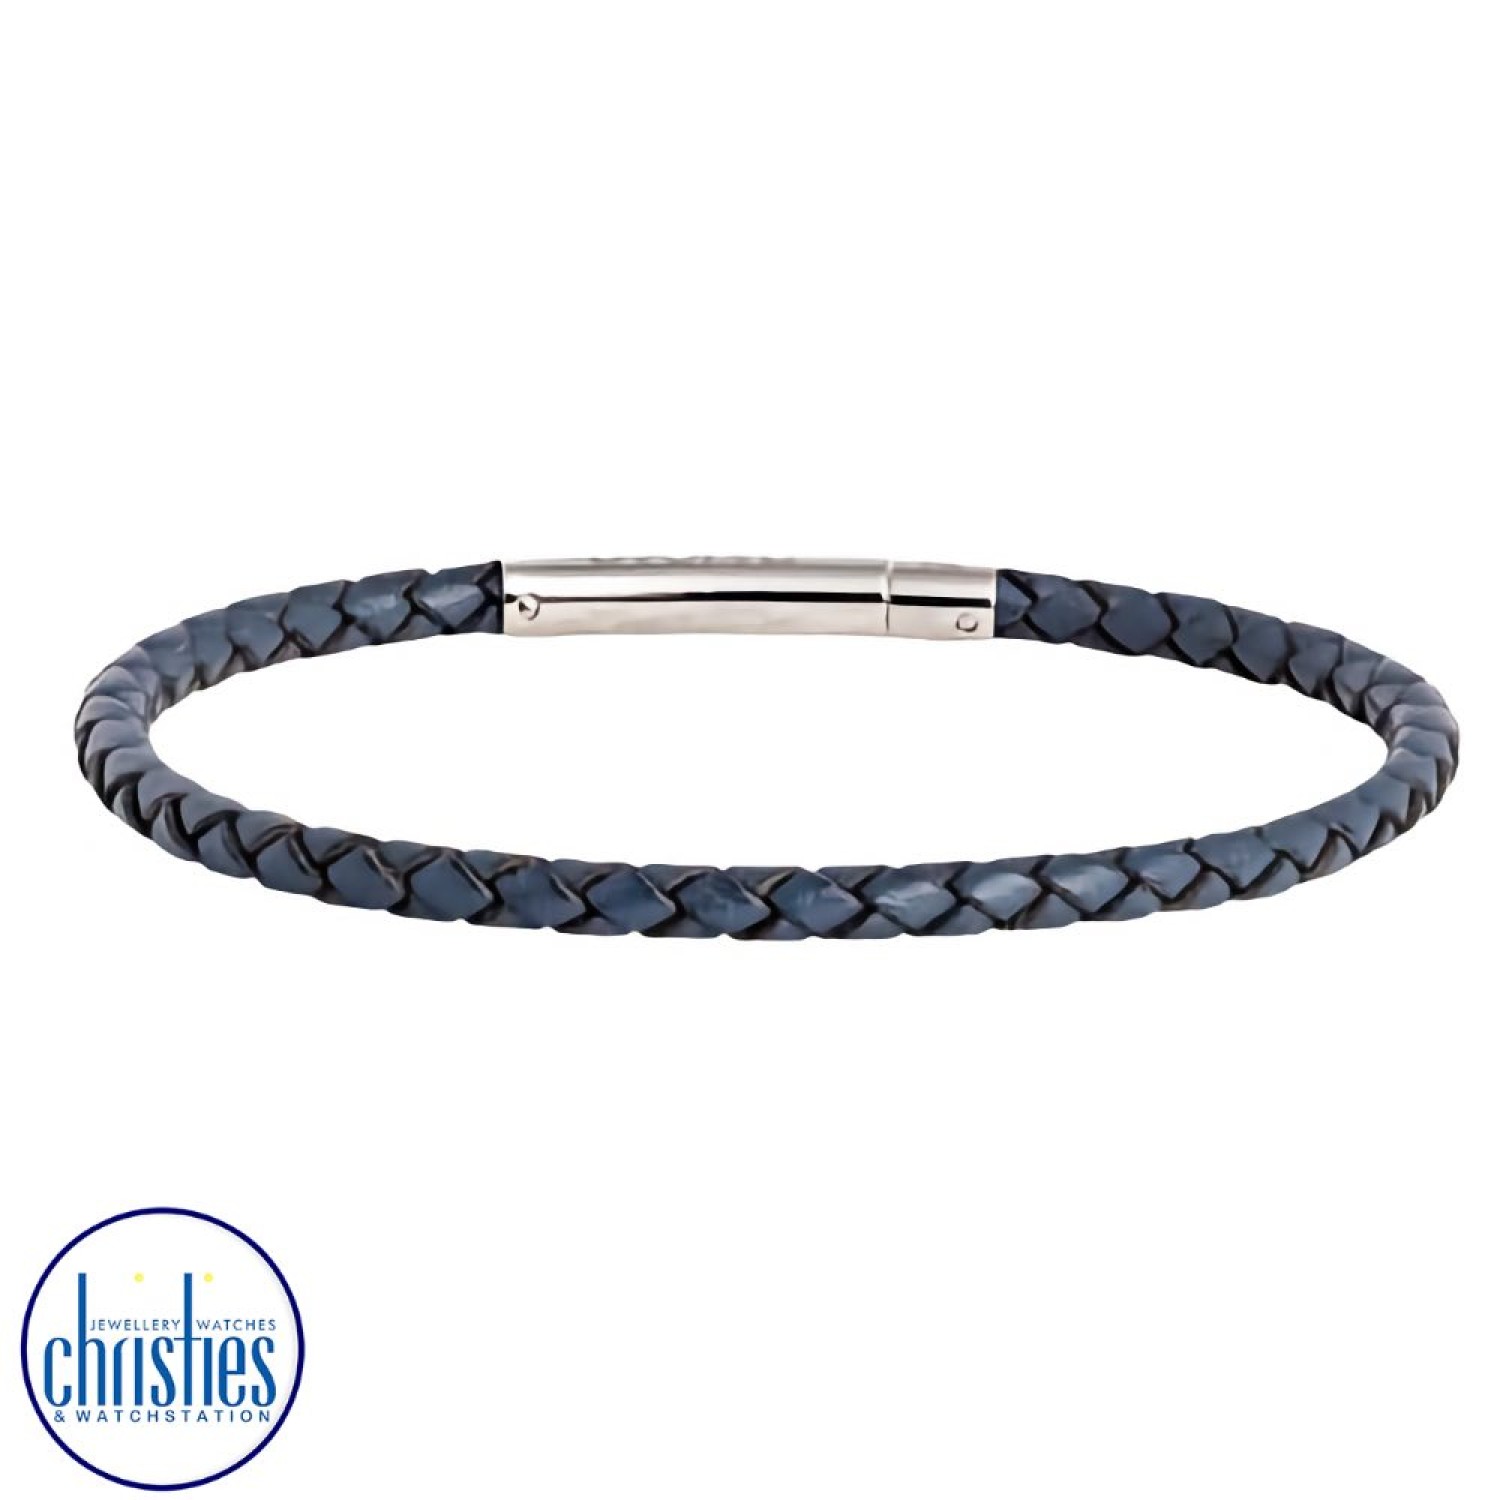 LKBEL-BL19-1 Evolve Jewellery Navy Journey Bracelet. Evolve's Journey bracelets are designed as an everyday companion for life’s journey.The beautiful interlinked pattern reminds us of woven flax (harakeke), a stylish & meaningful part of Māori cultu